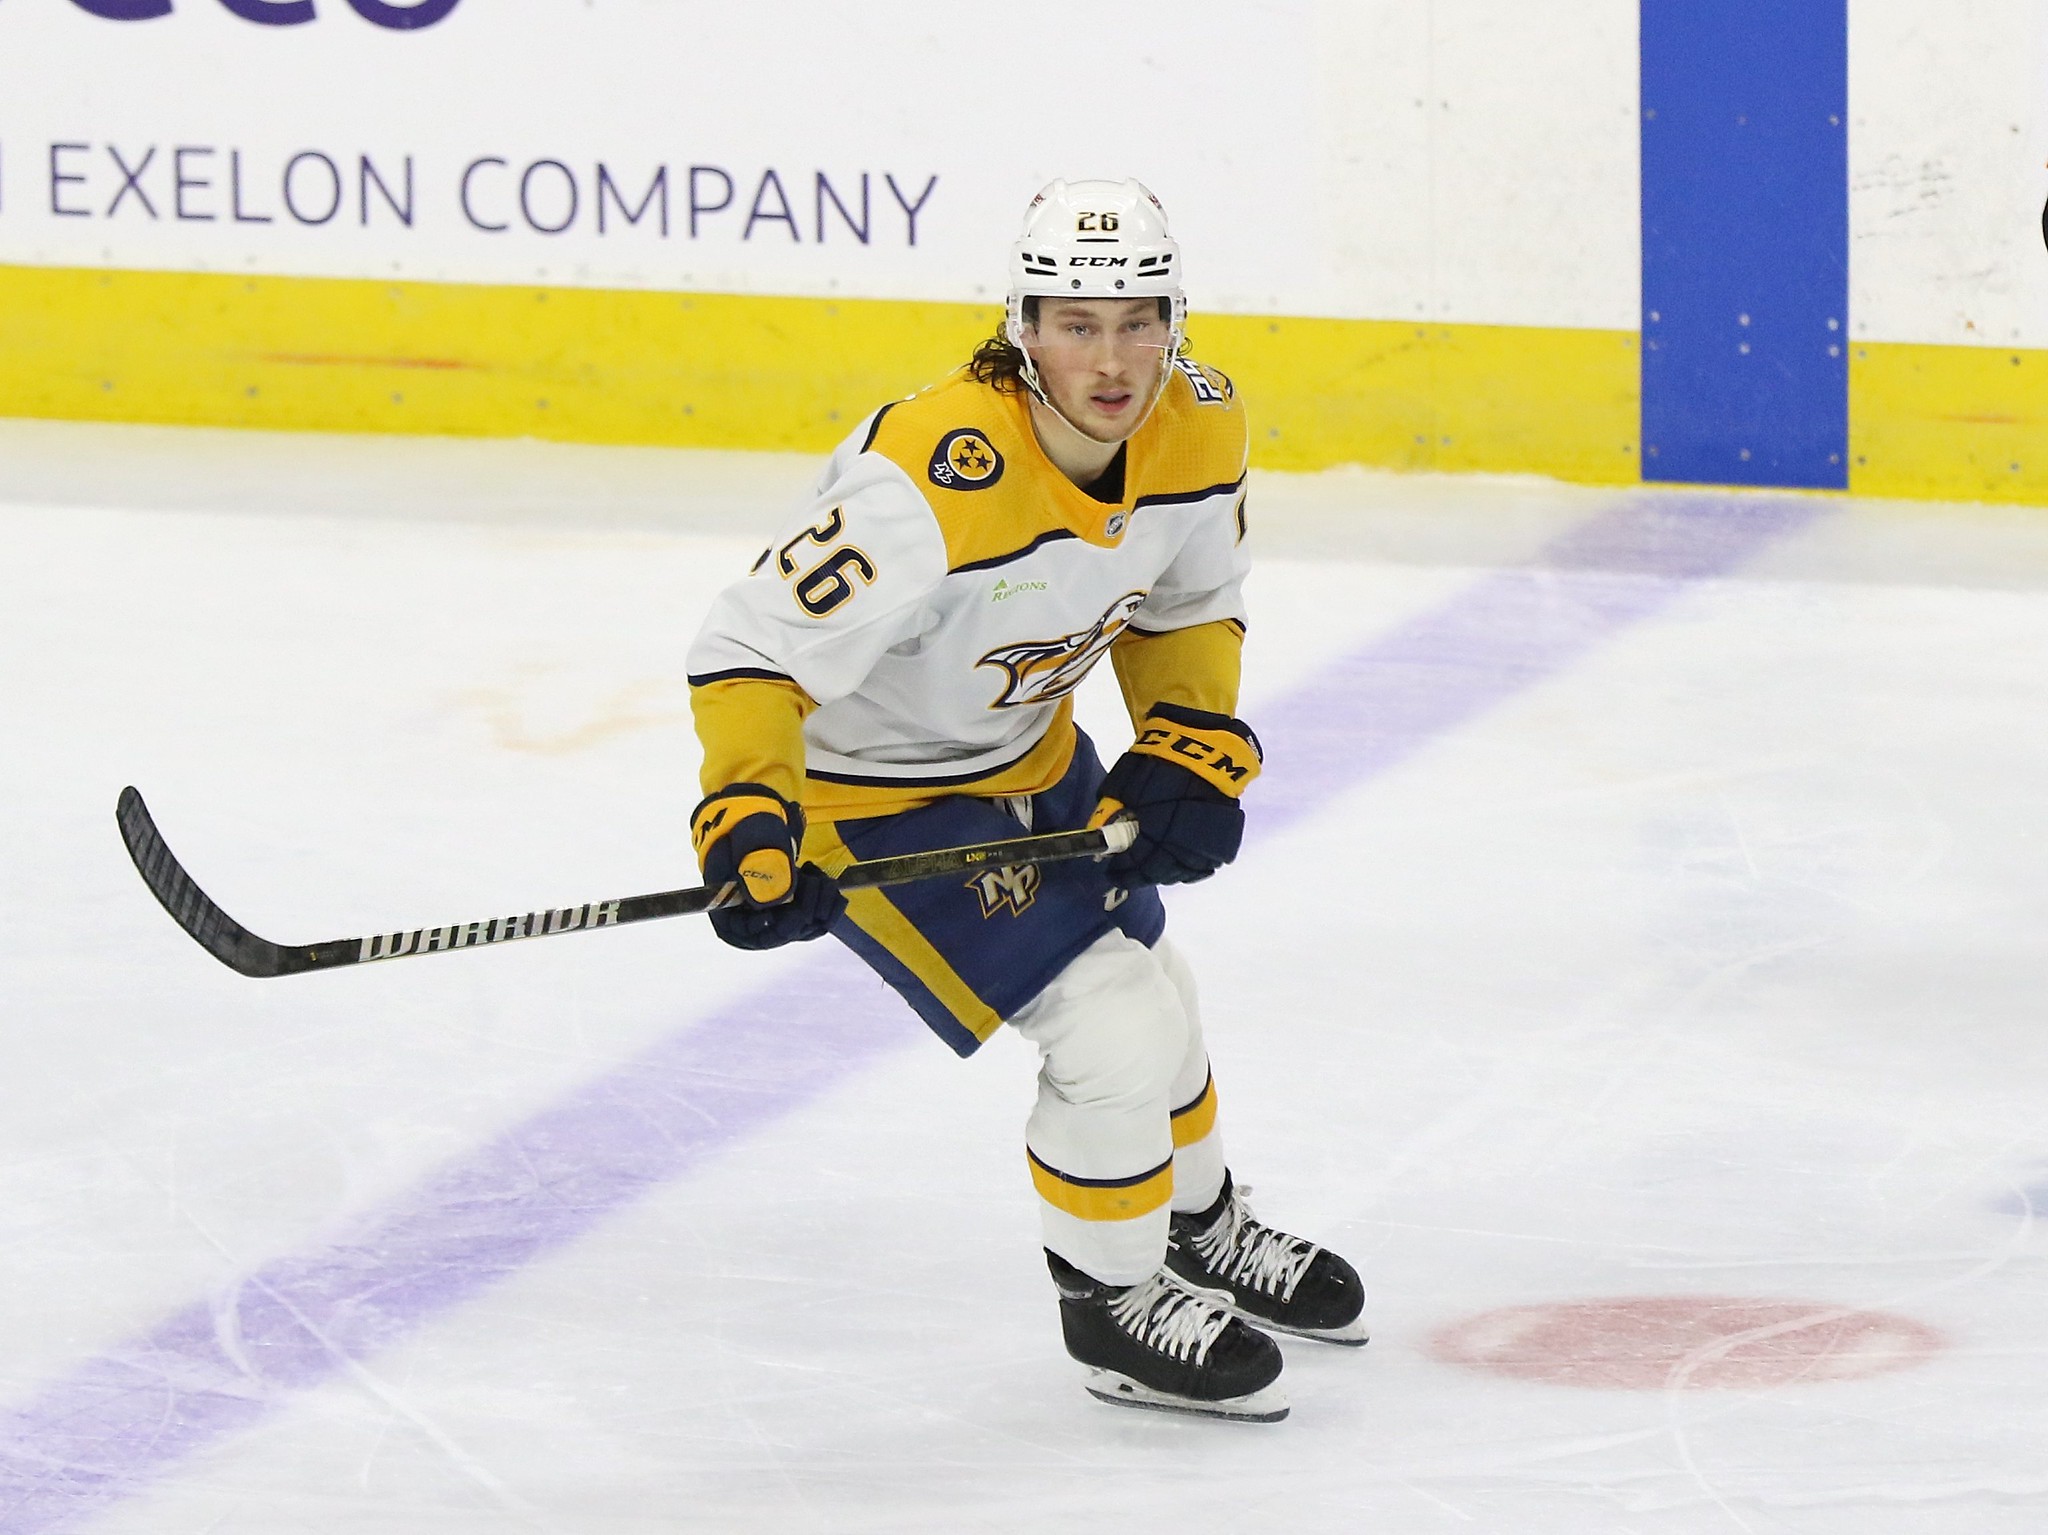 Nashville Predators Bolster Offense with Roster Moves: Tomasino Sent to Milwaukee, Afanasyev and Jankowski Recalled